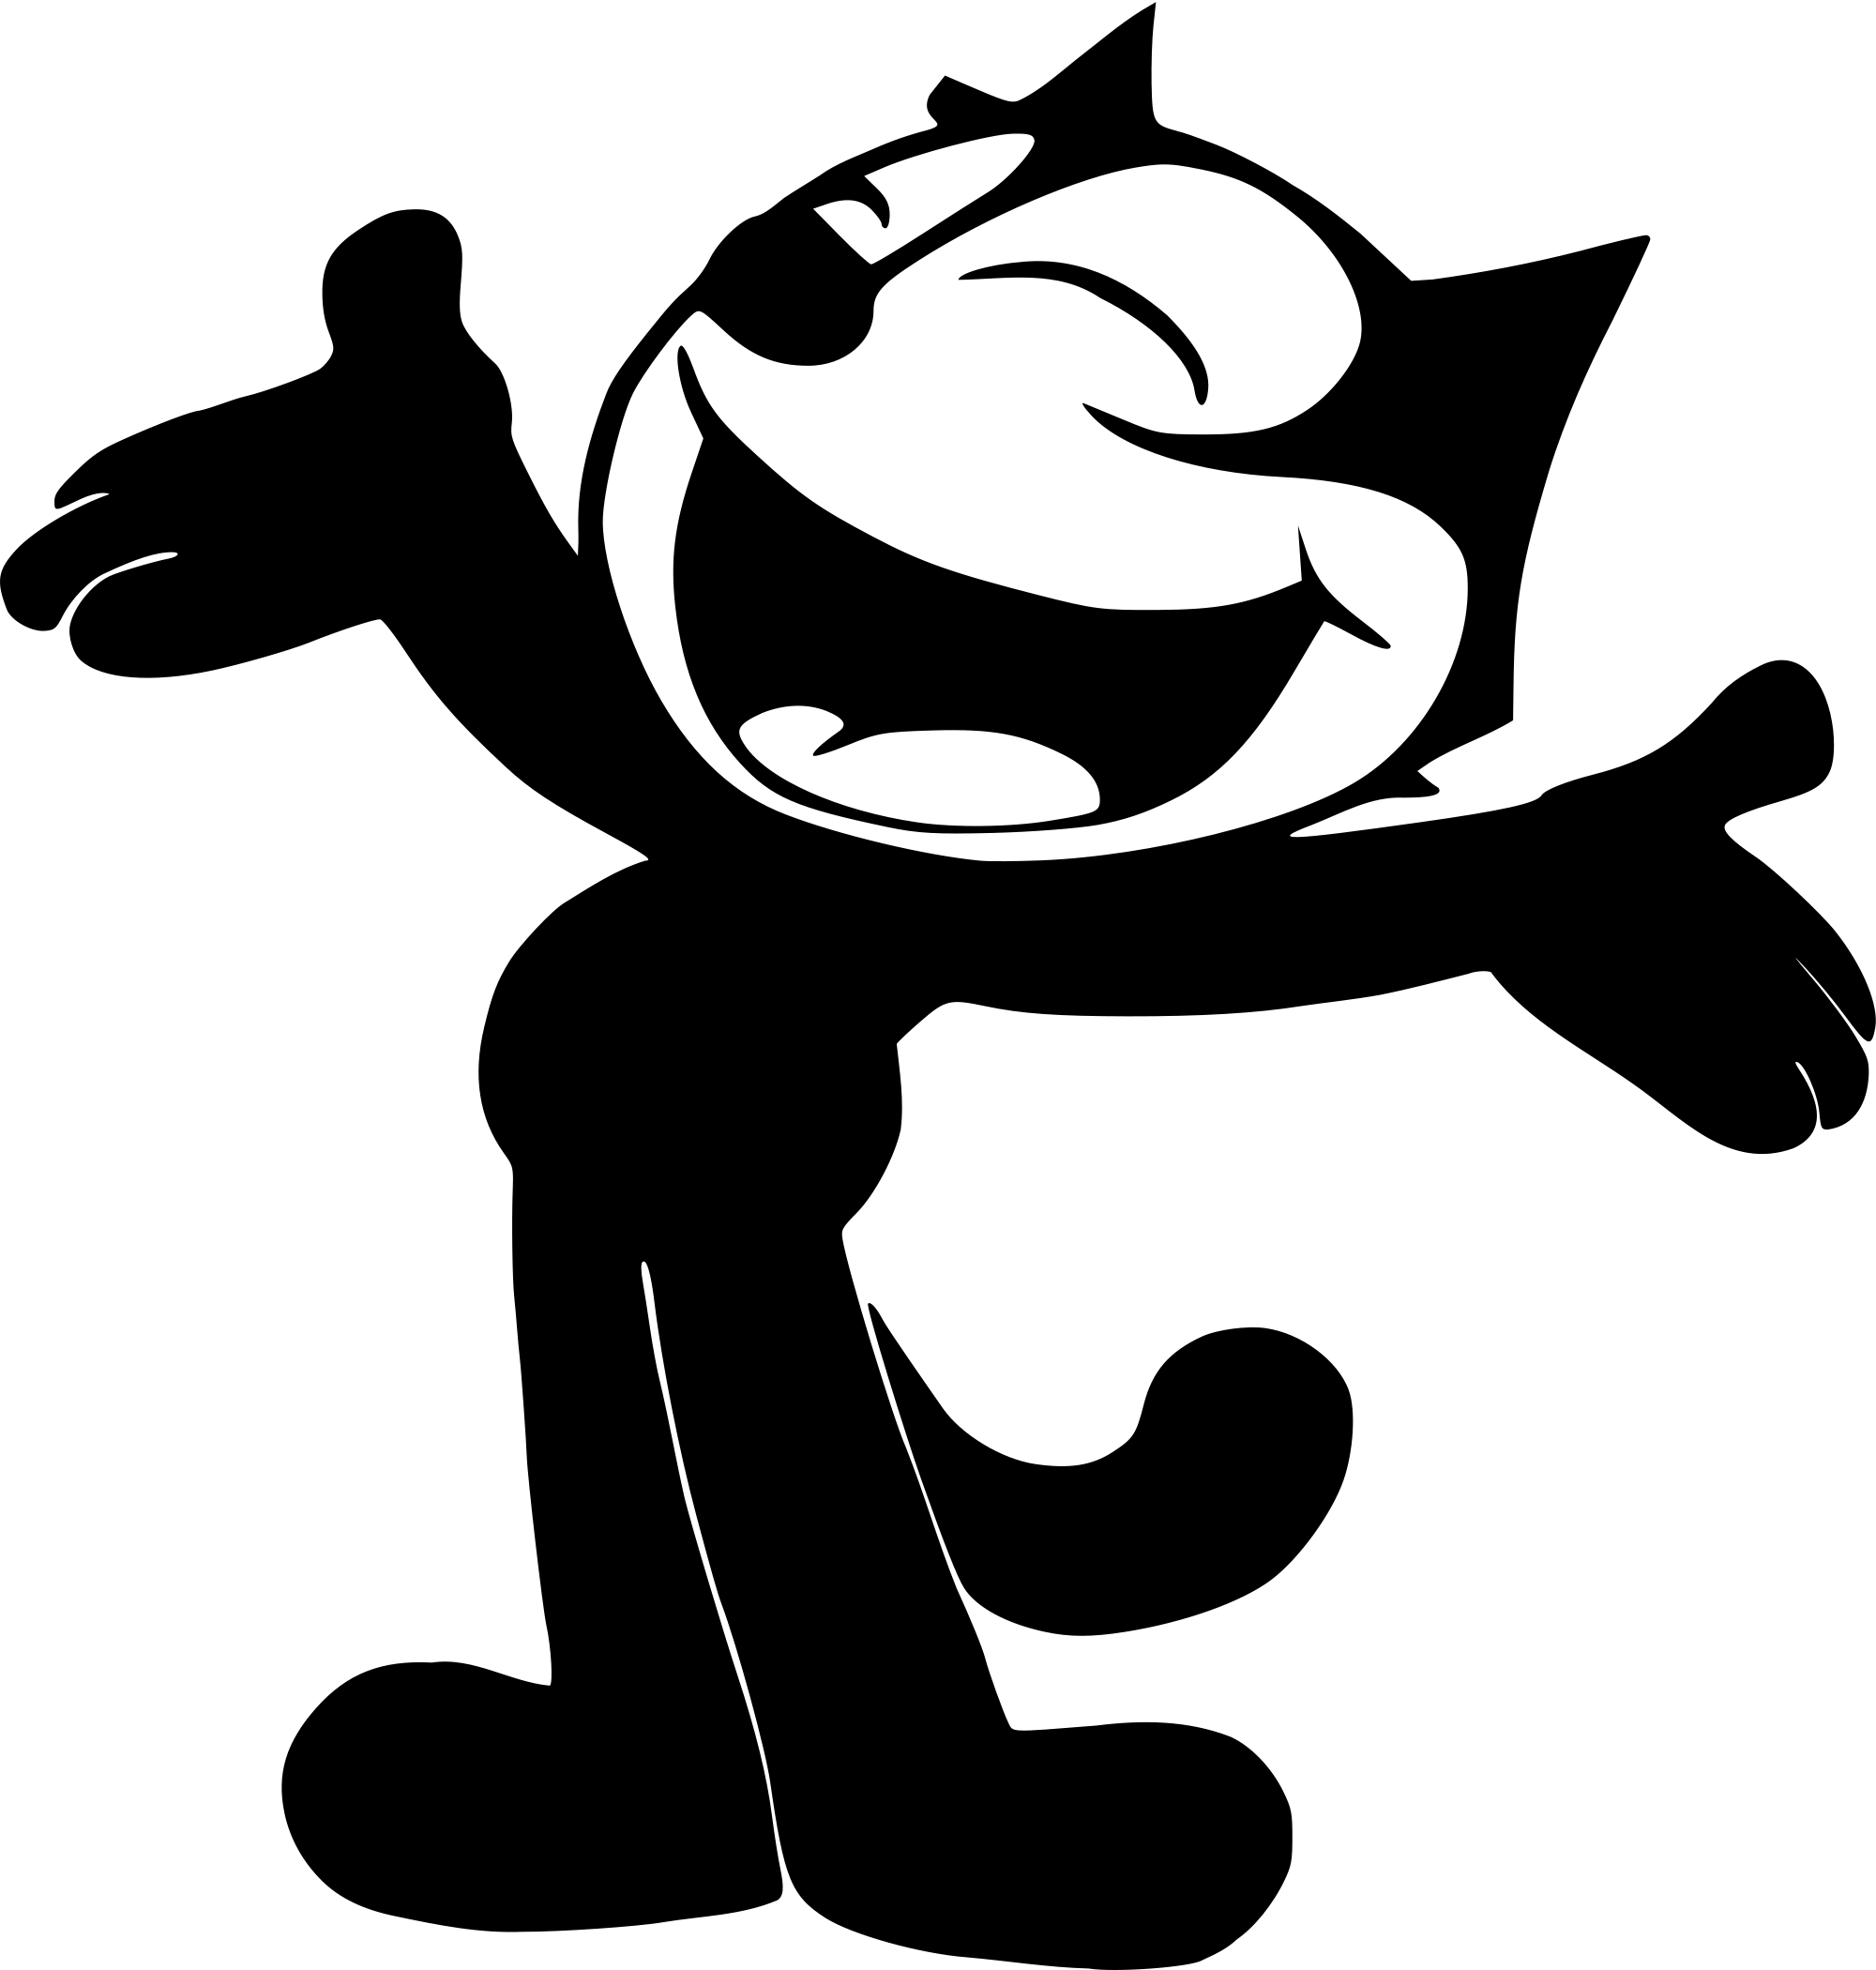 FELIX THE CAT CLEAR BACKGROUND